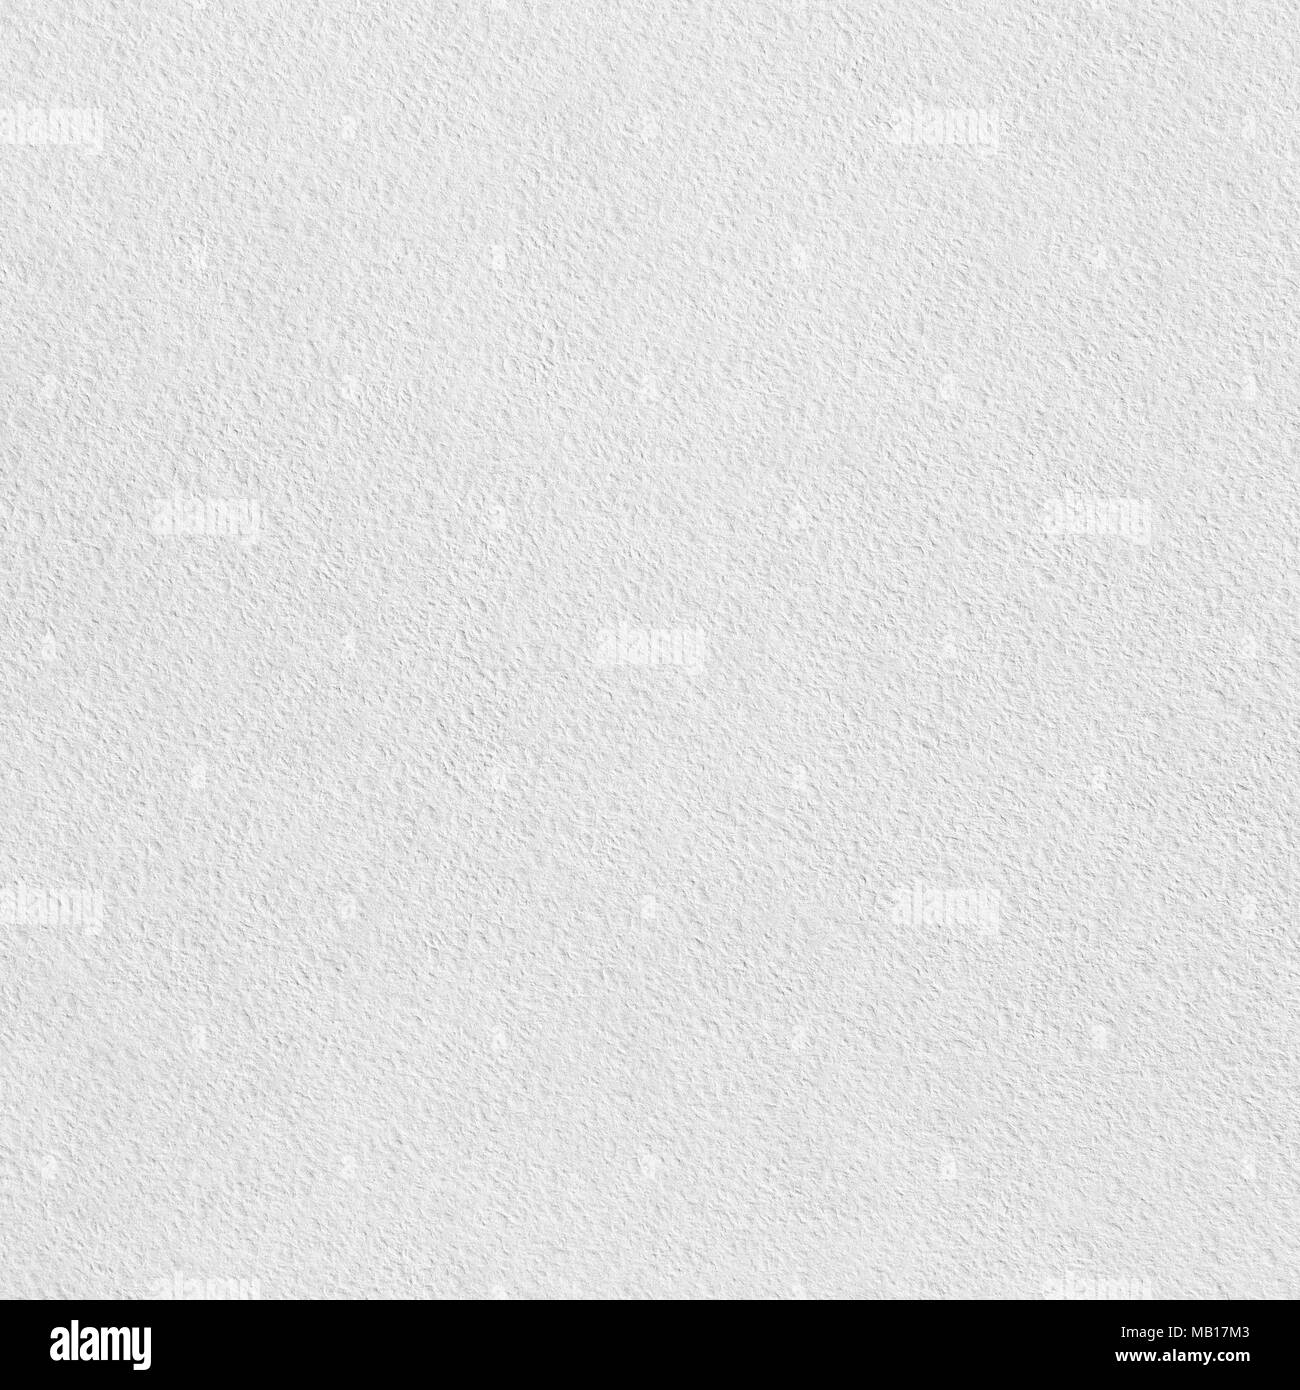 Blank white watercolour paper texture or background. Top view. Flat lay. Stock Photo